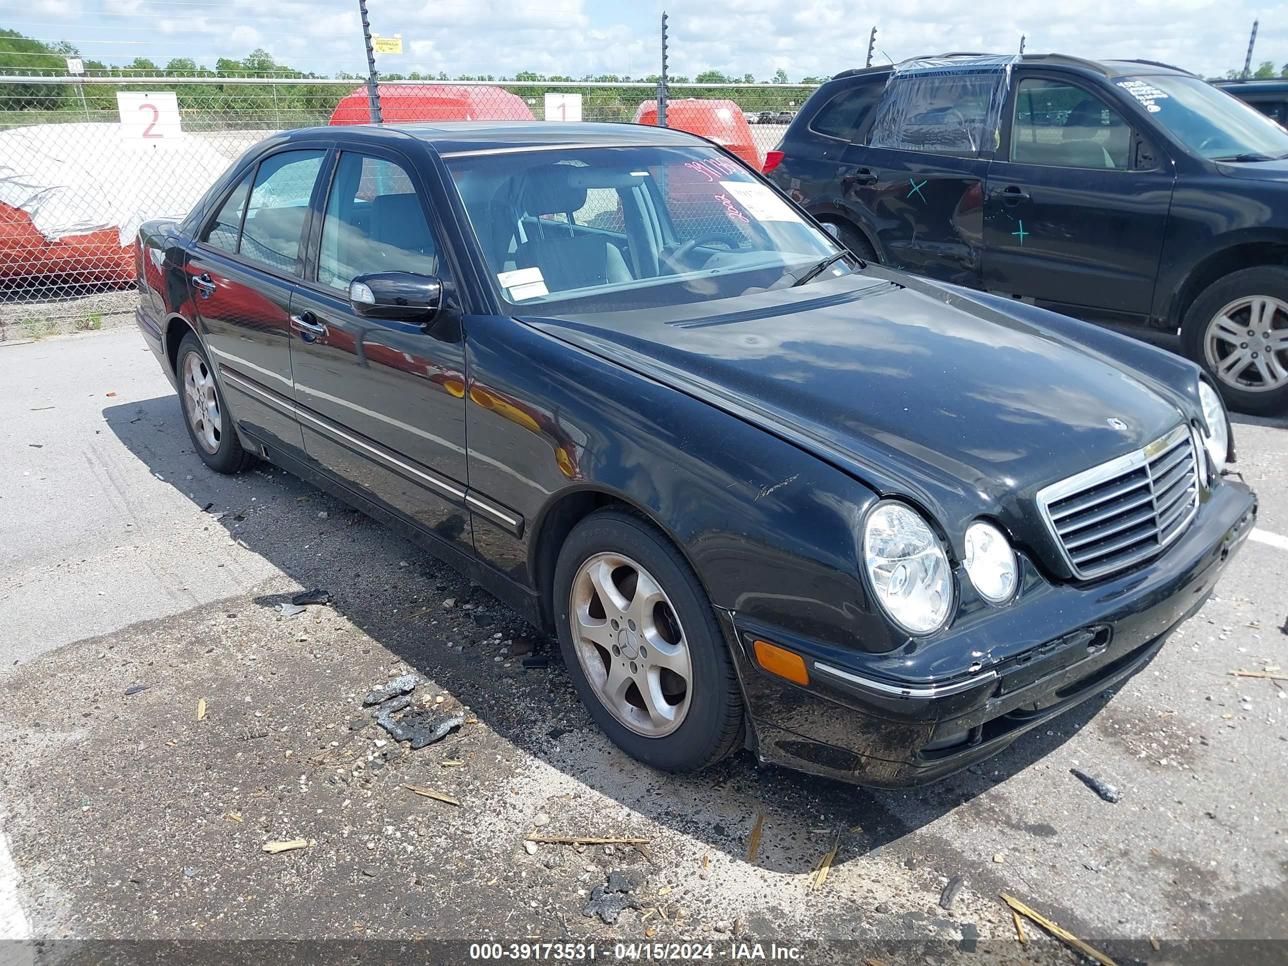 vin: WDBJF65J62B452466 WDBJF65J62B452466 2002 mercedes-benz  3200 for Sale in 70126, 6600 Almonaster Ave, New Orleans, Louisiana, USA